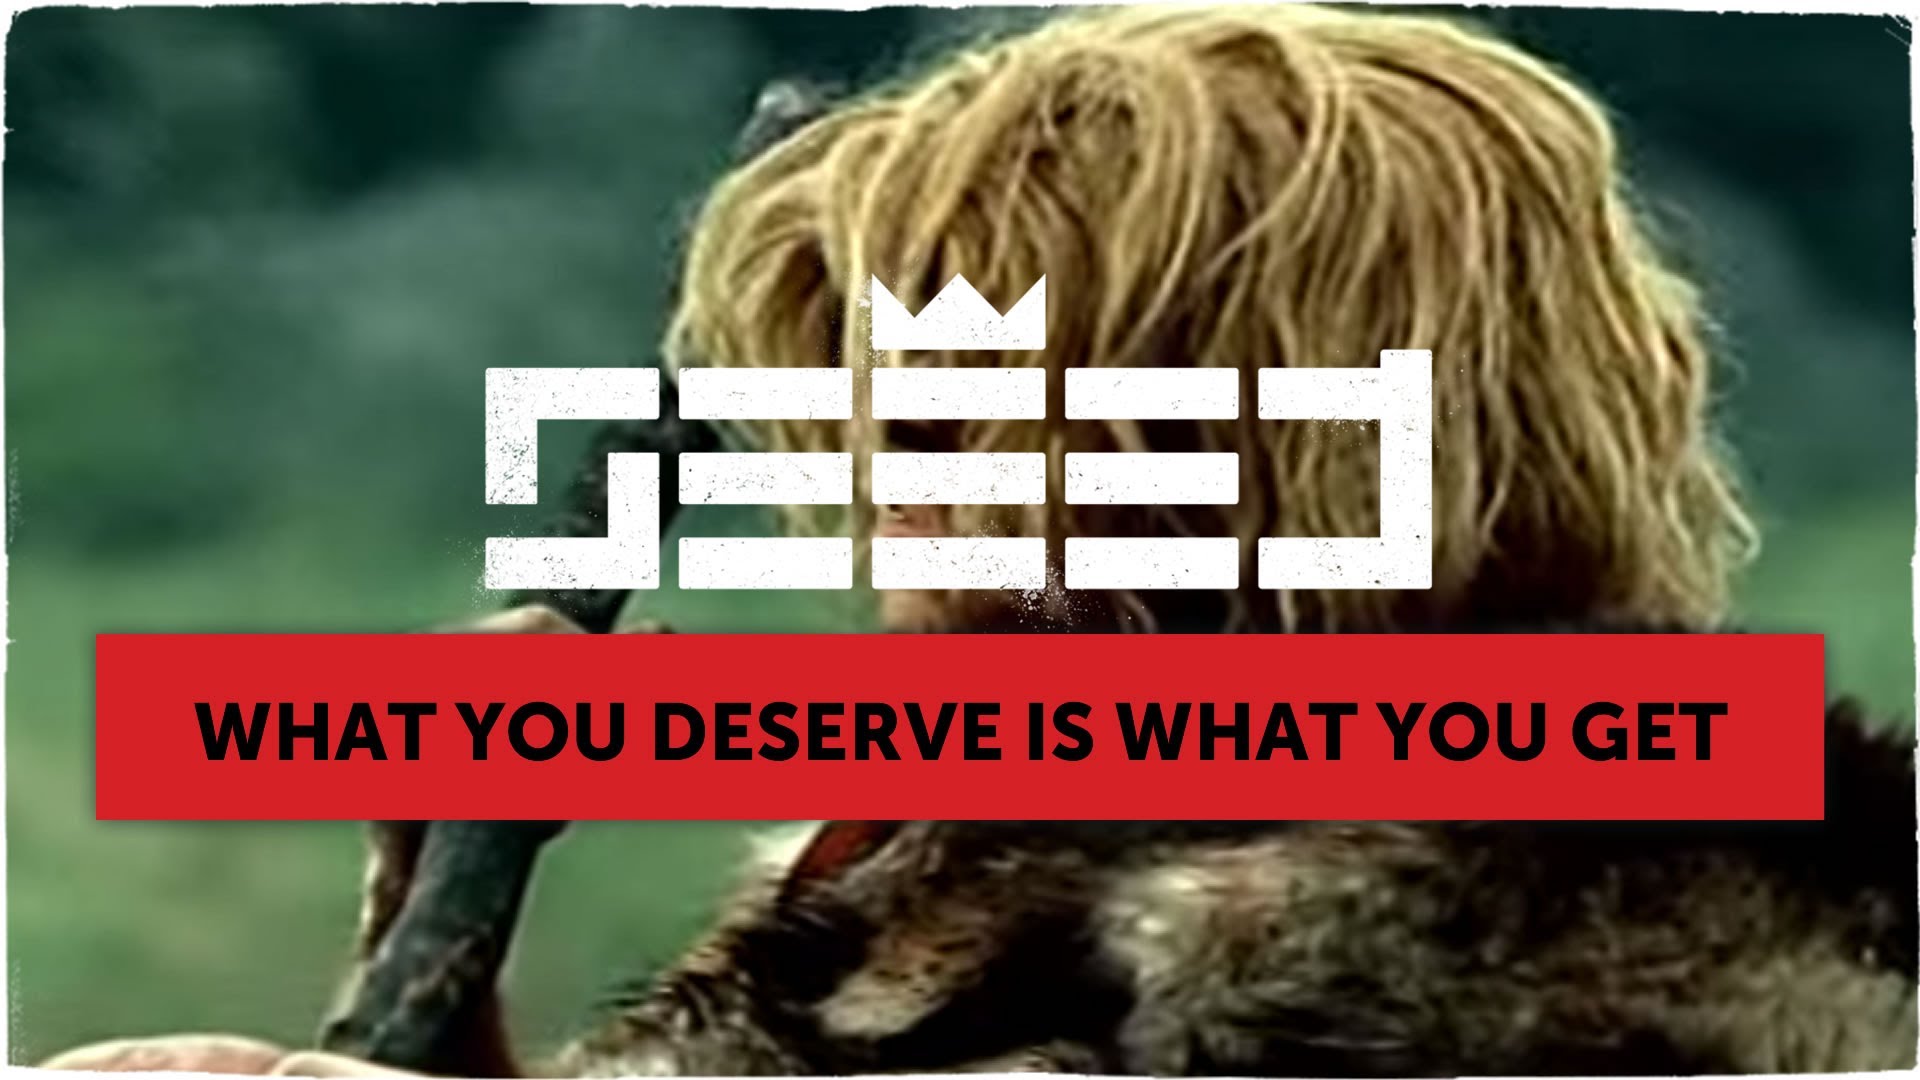 Seeed - What You Deserve Is What You Get [11/10/2003]